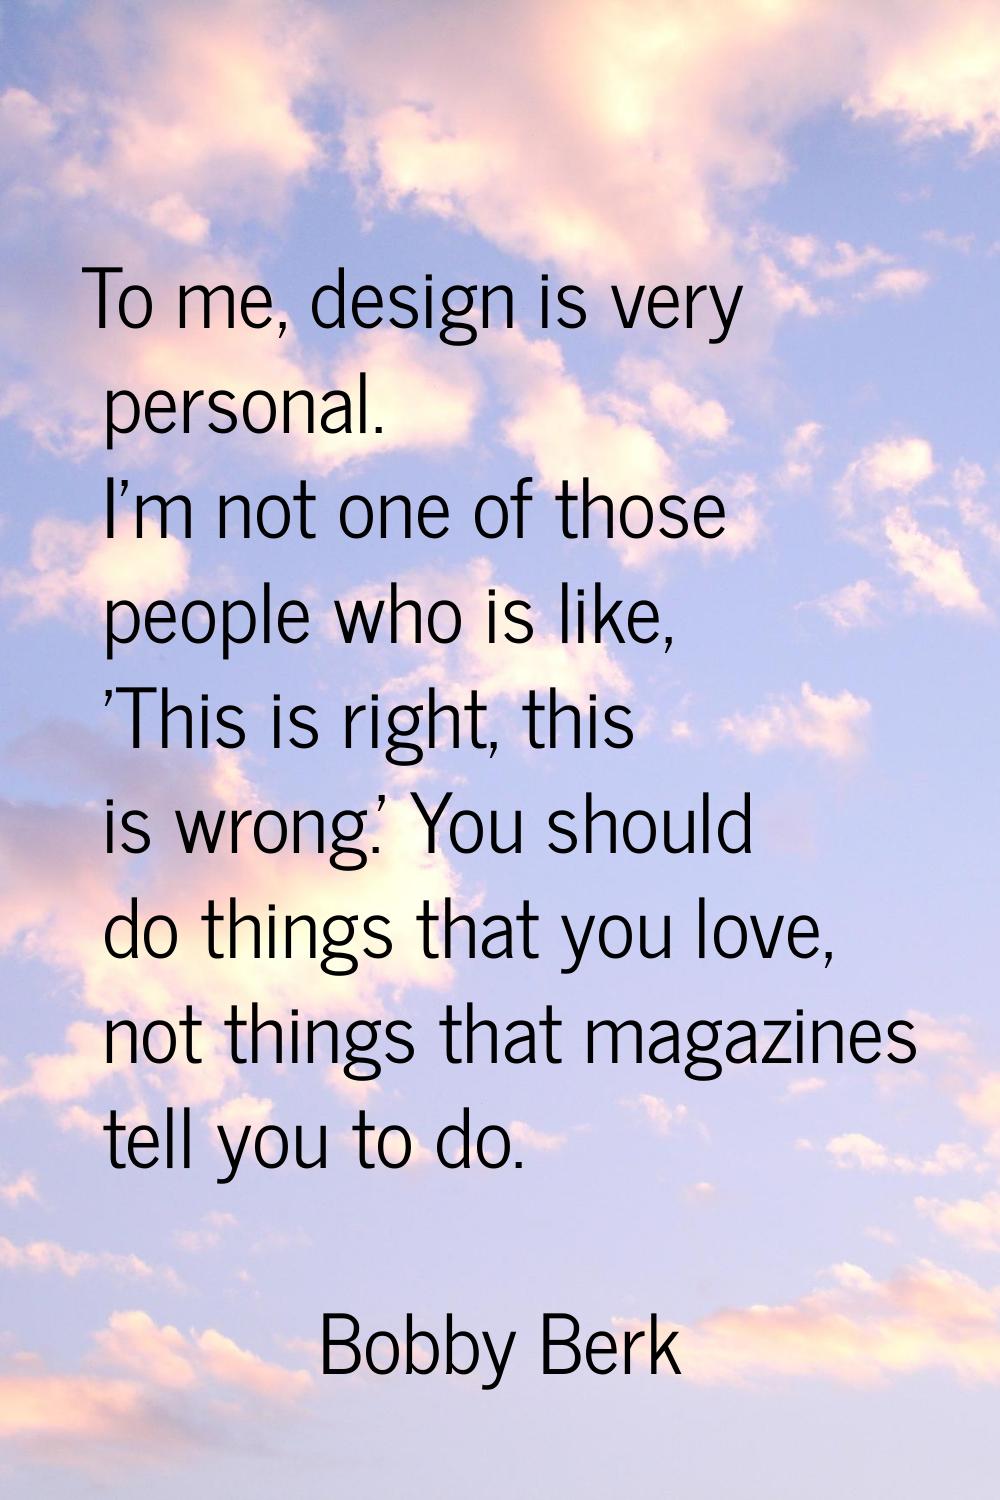 To me, design is very personal. I'm not one of those people who is like, 'This is right, this is wr